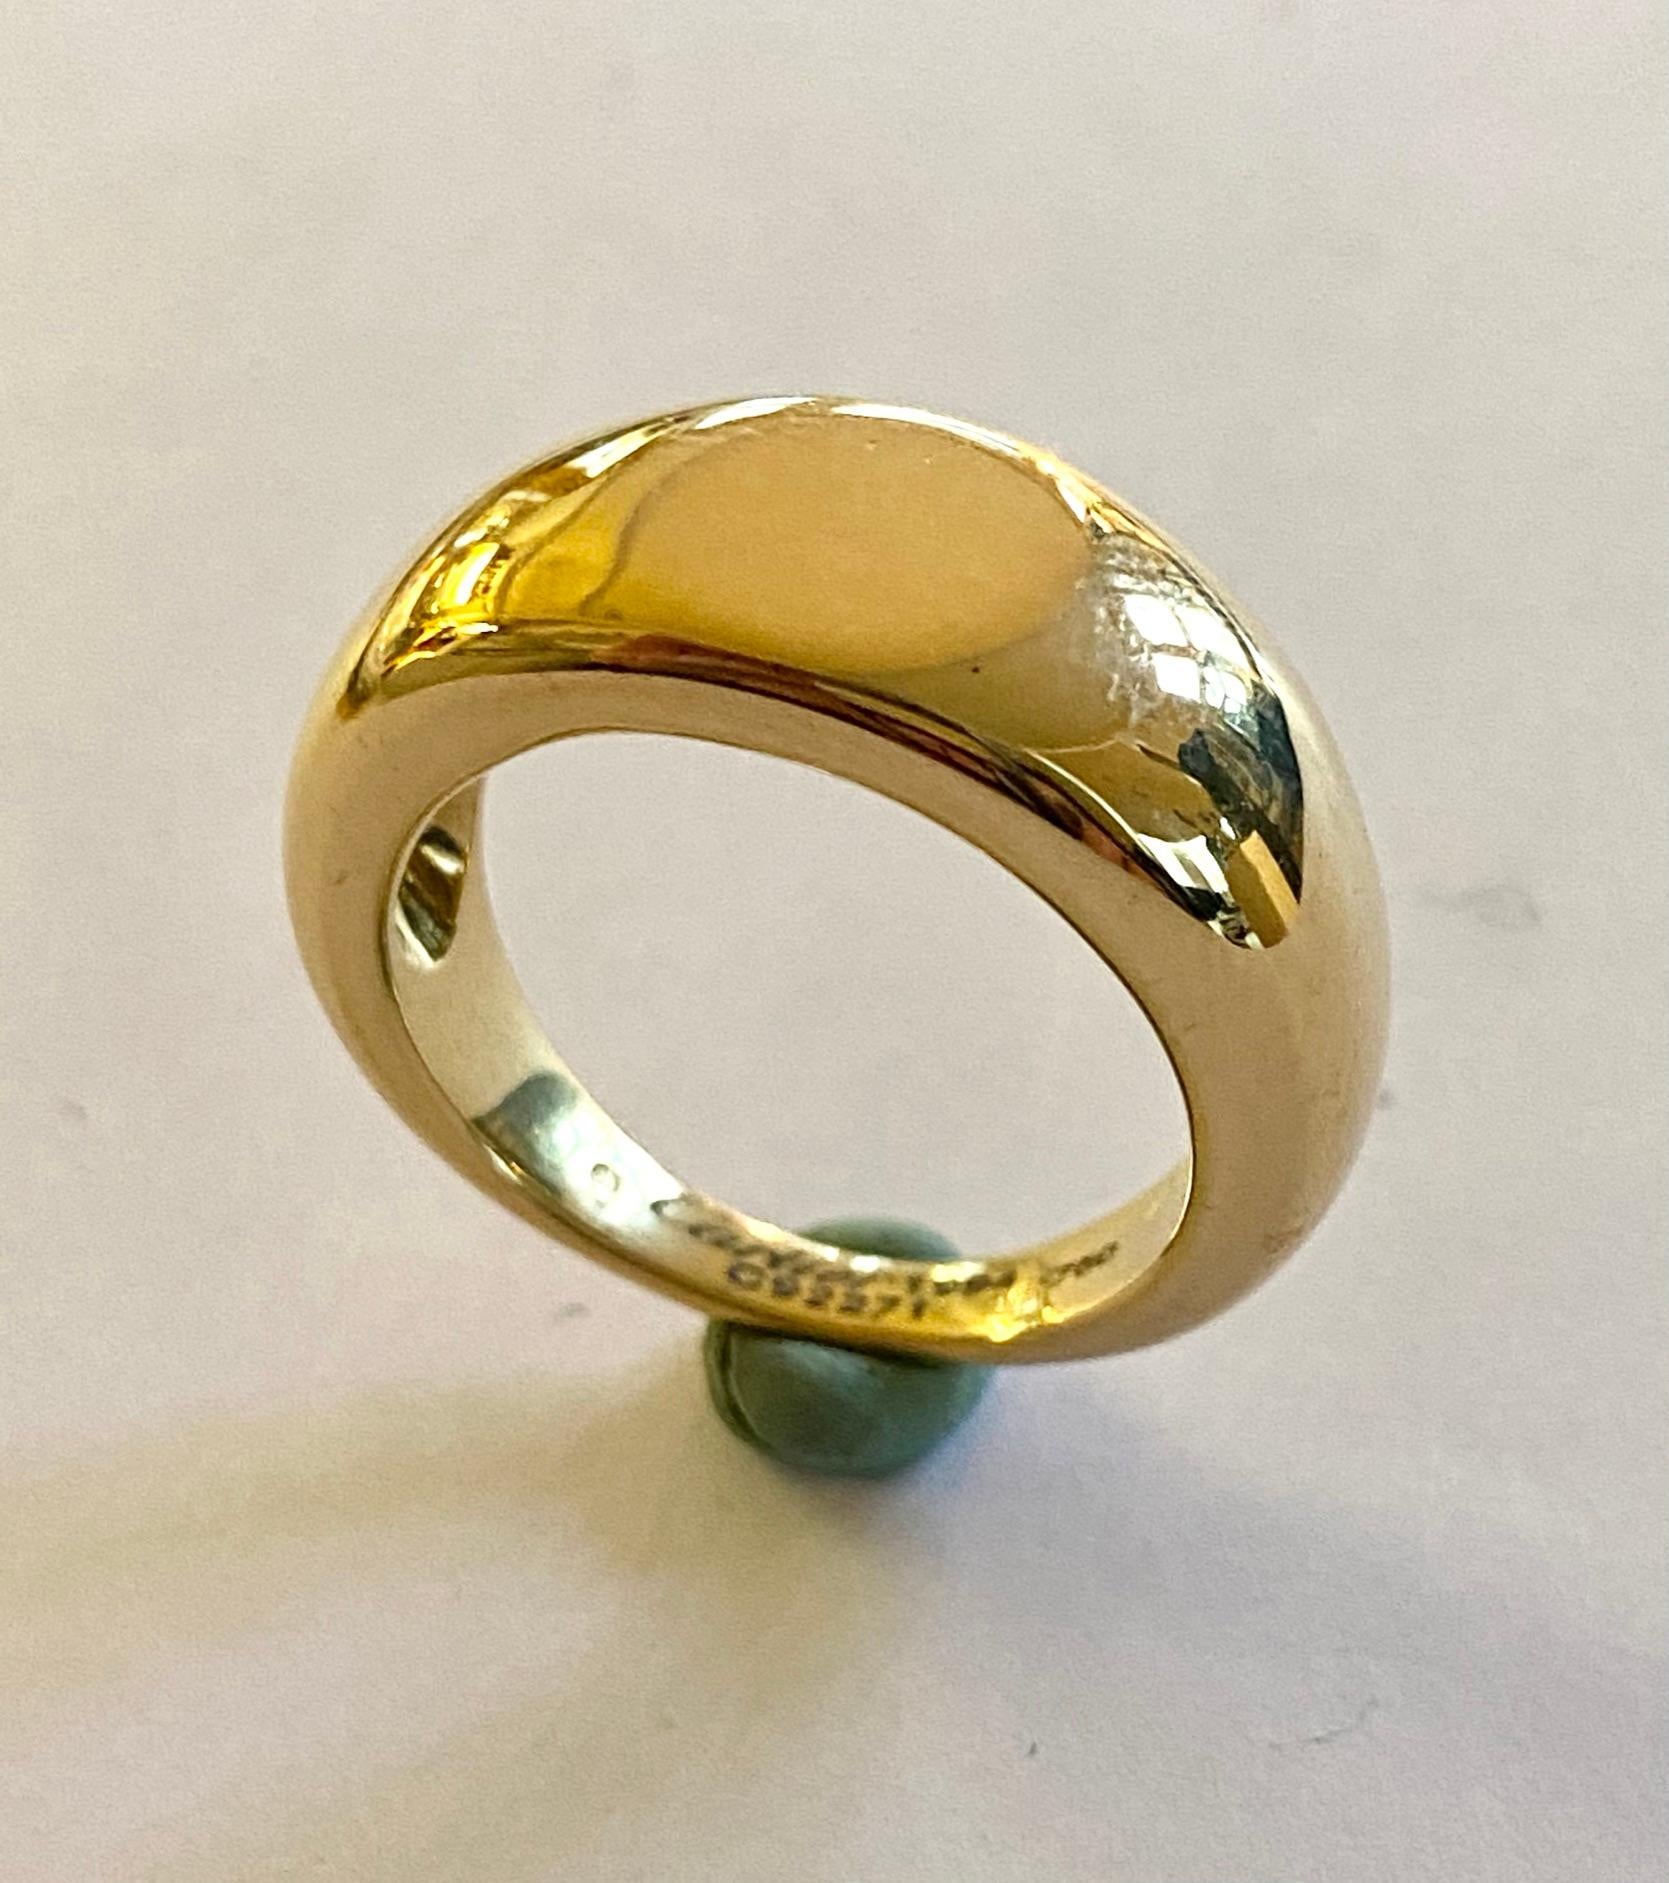 One (1) 18K. Yellow Gold Signet Ring.
Signed Cartier 
nr C92271   
Deliverd with originel Box Cartier and Certificate
Sold in 1997 in Geneve
Made in 1994  
Wight: 19.01 gram
size: 20.5 (64,5  USA: 11   UK: W